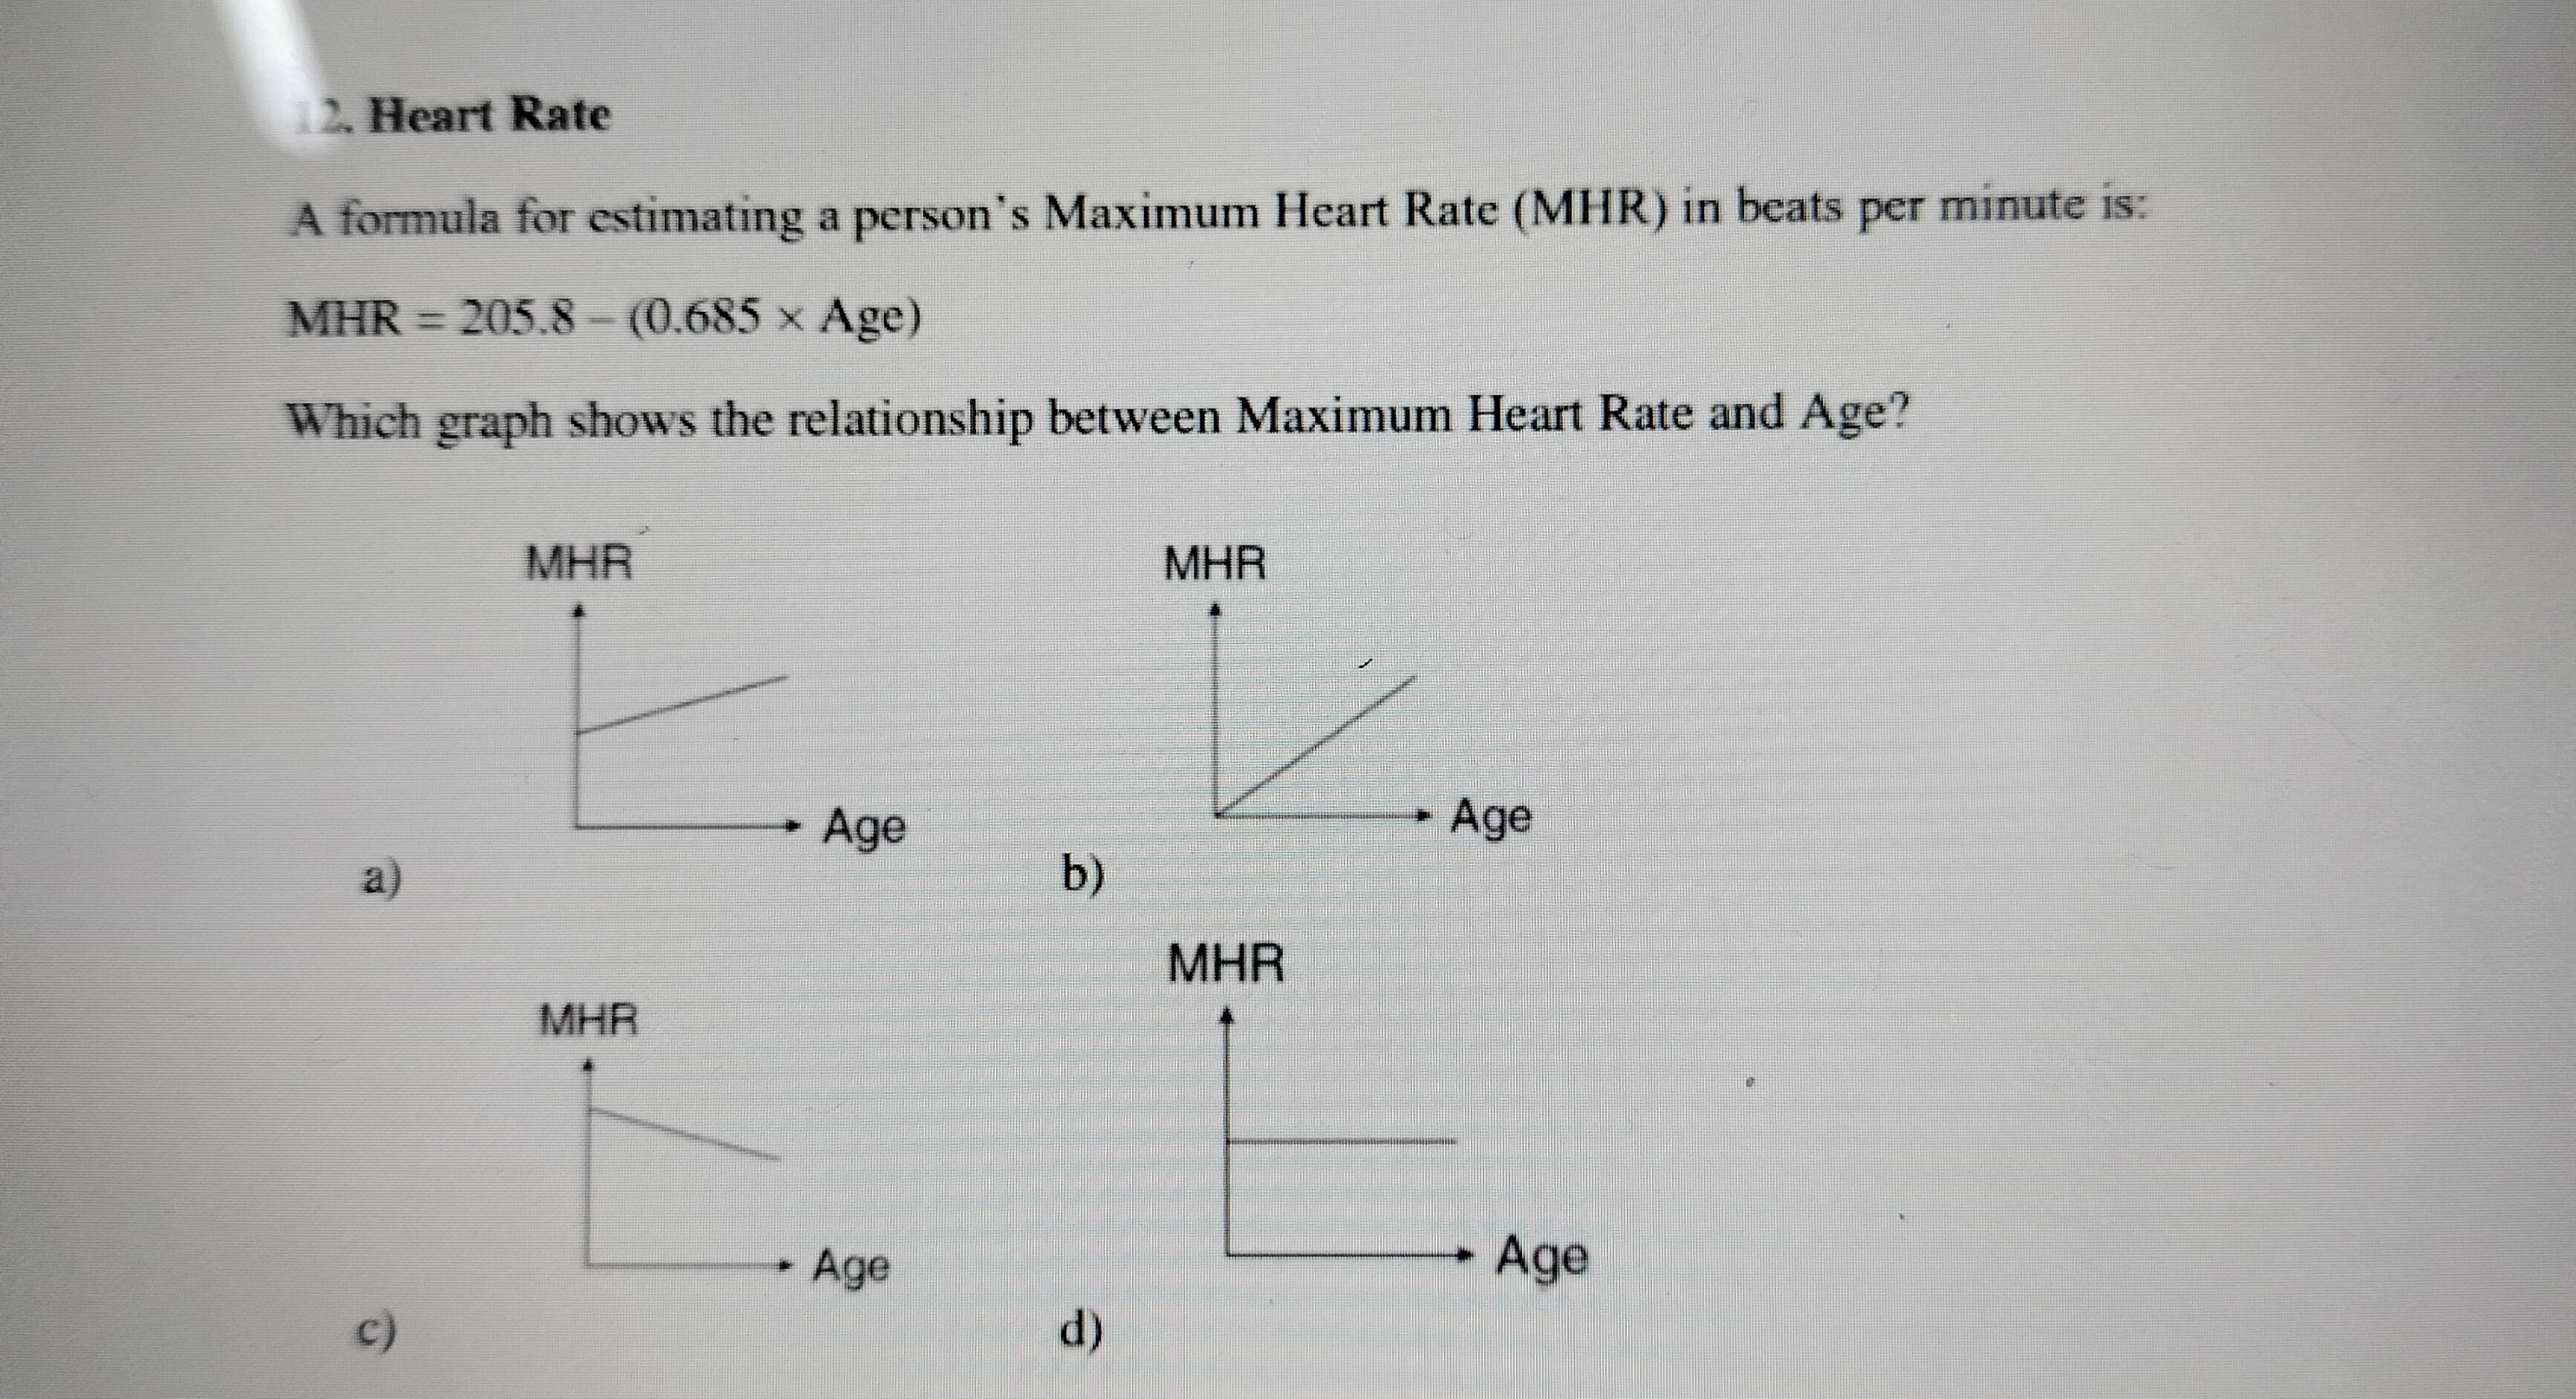 Heart Rate A formula for estimating a person's Maximum Heart Rate (MHR